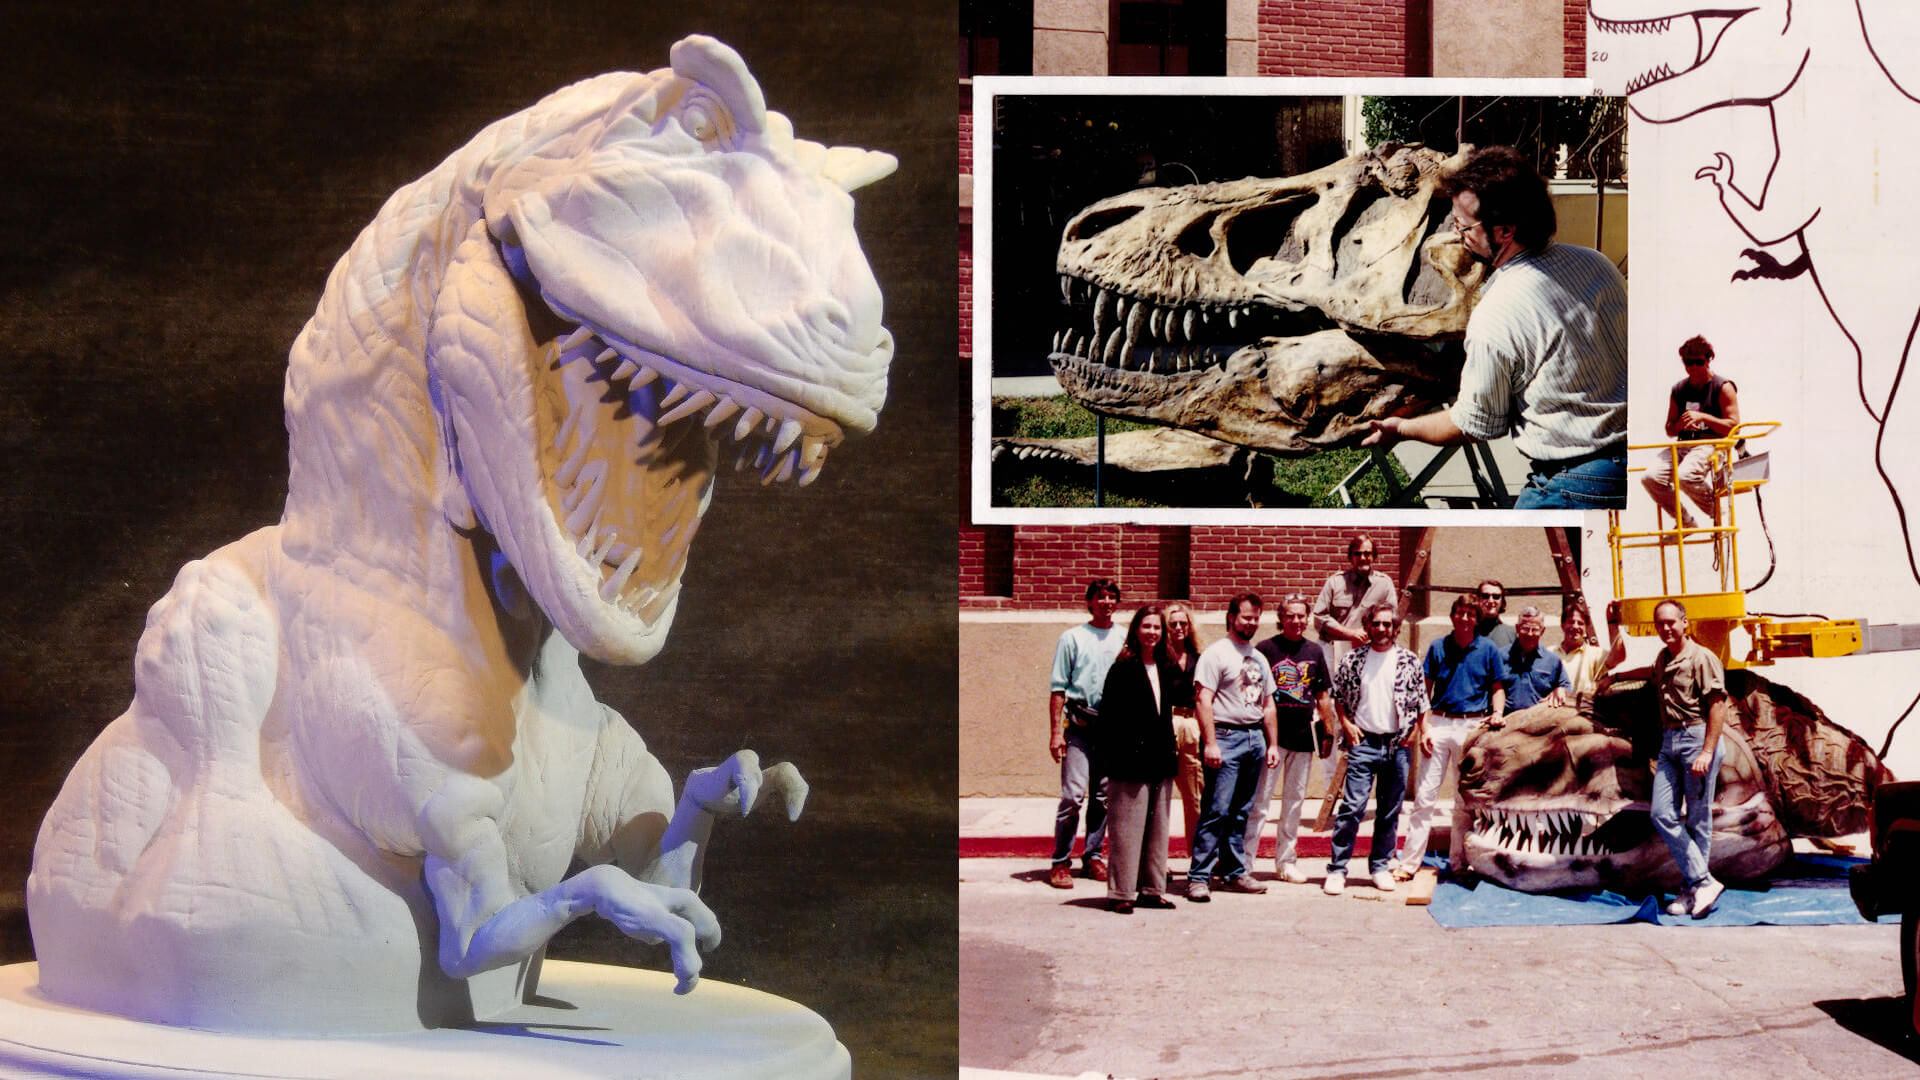 See Jurassic Park’s Original T-Rex In A Video Uncovering Tim Lawrence’s Files!